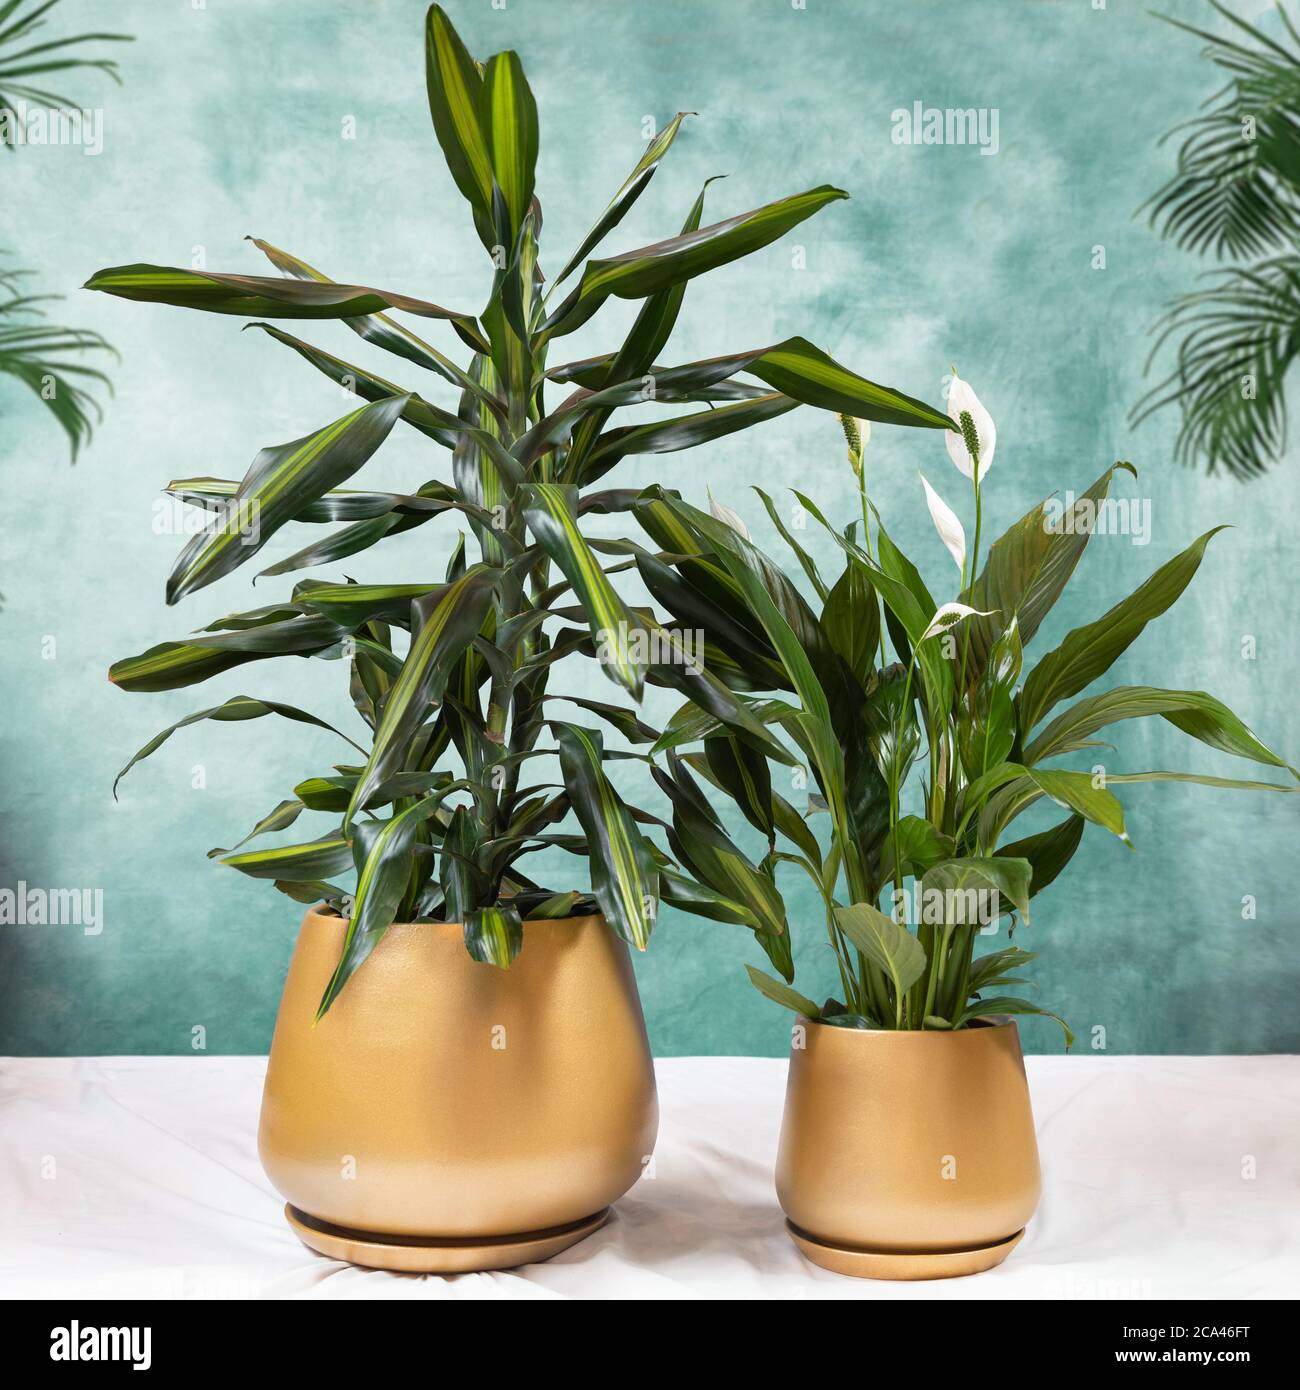 Dracaena fragrans Cintho and Peace Lily plant in a golden pot Stock Photo